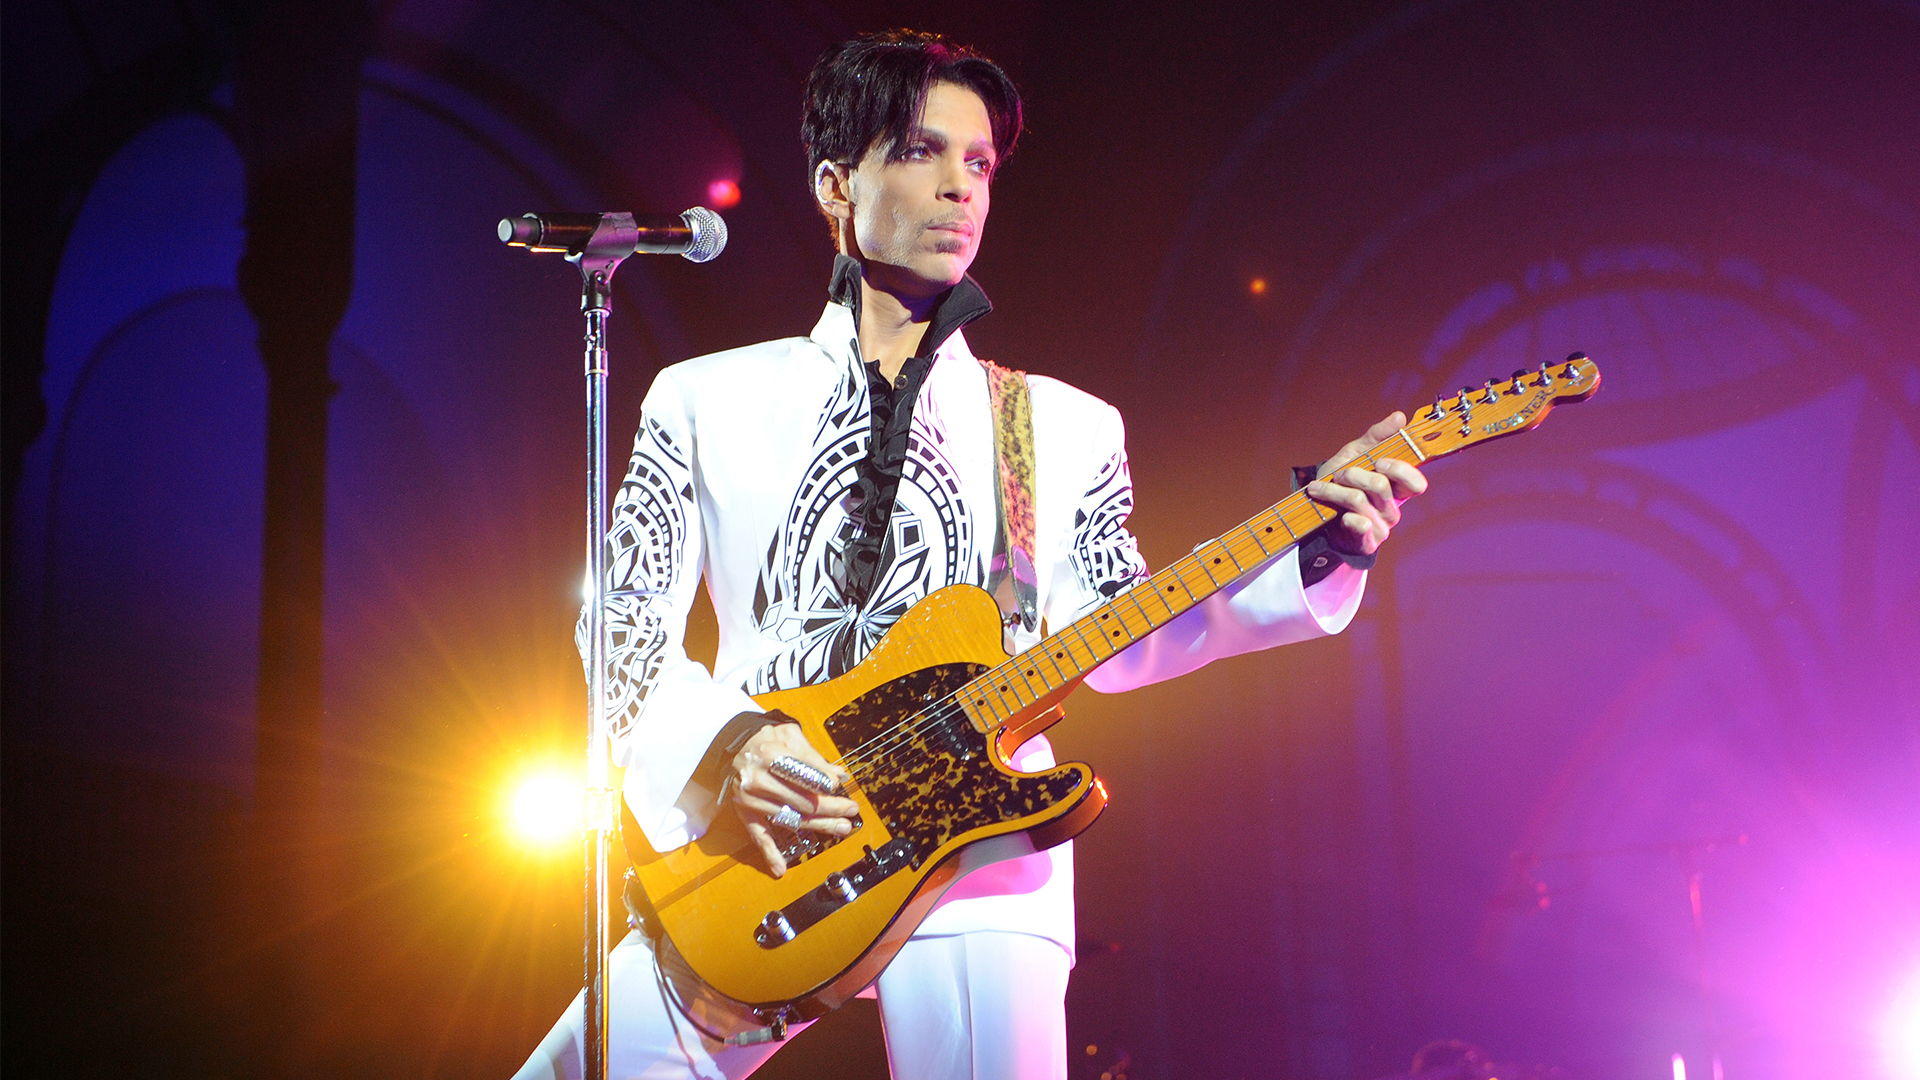 Prince Legacy LLC Managers File A Lawsuit Against The Late Legend's Family Members Over Control Of His Estate